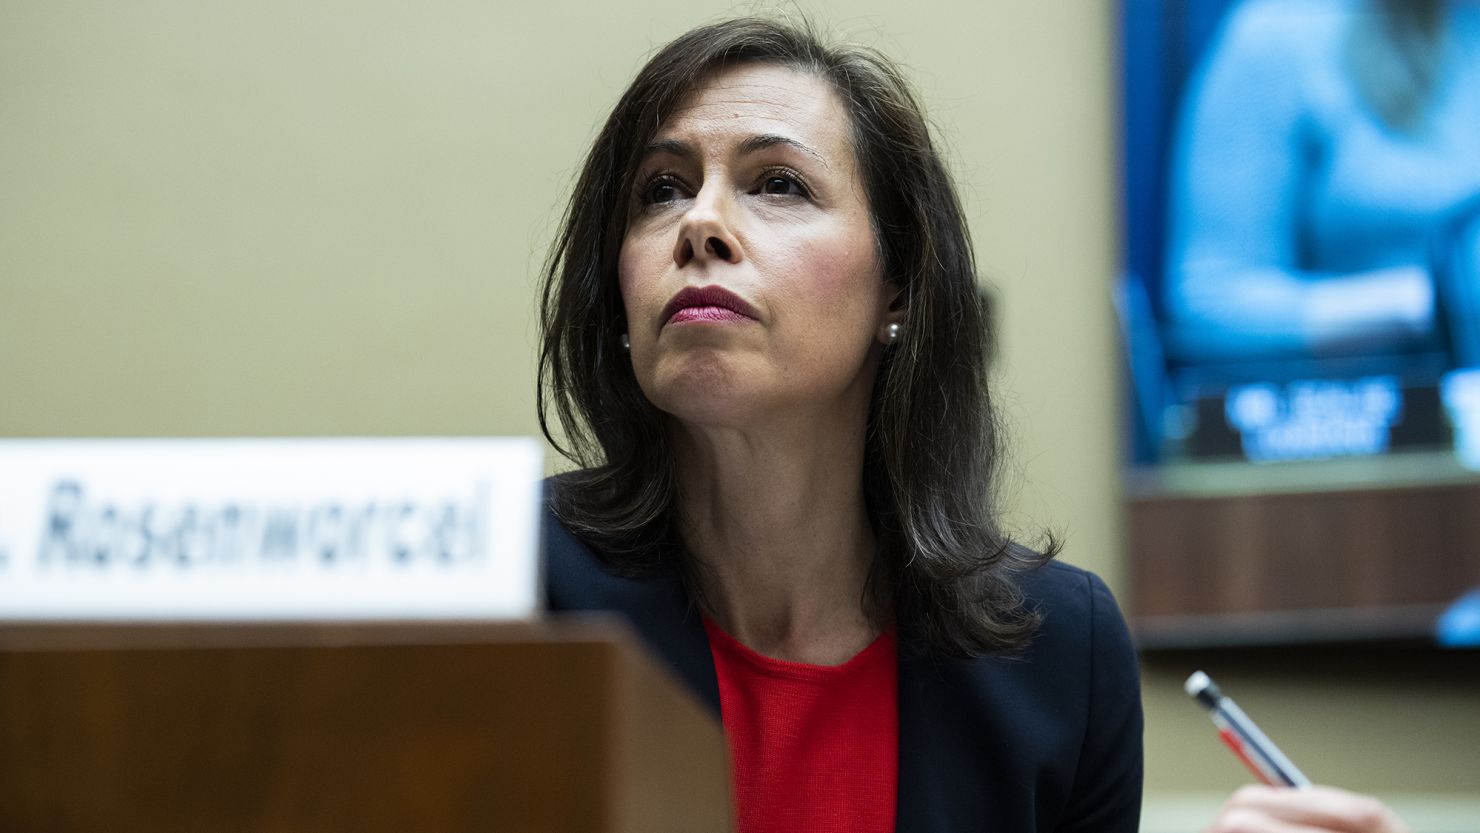 Federal Communications Commission Chairwoman Jessica Rosenworcel in a March 31, 2022 photo.